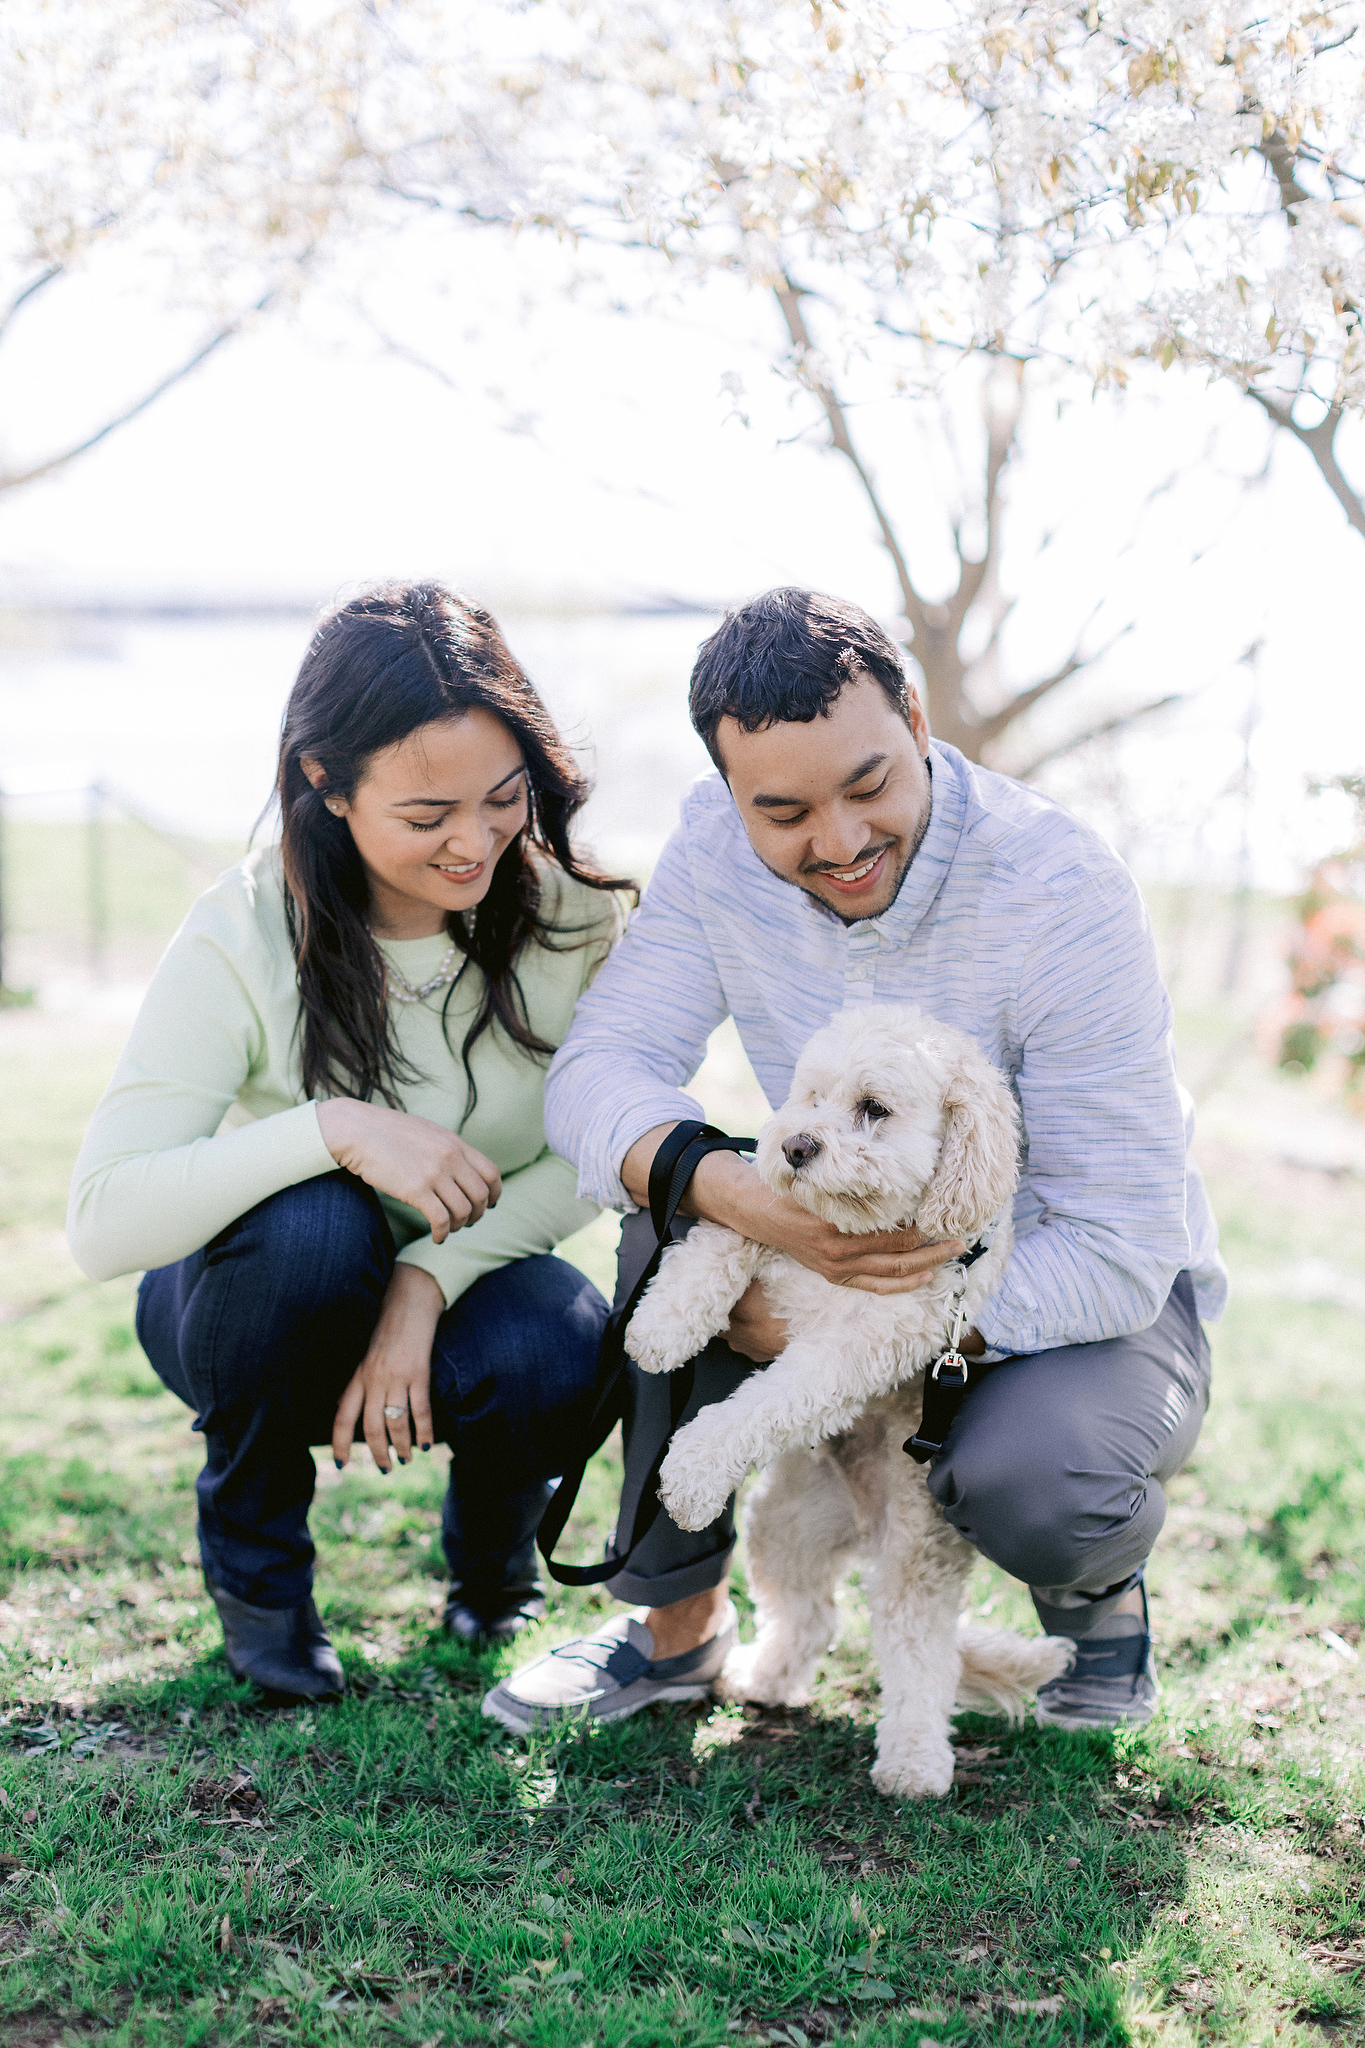 The engaged couple is cuddling their dog. Image by Jenny Fu Studio